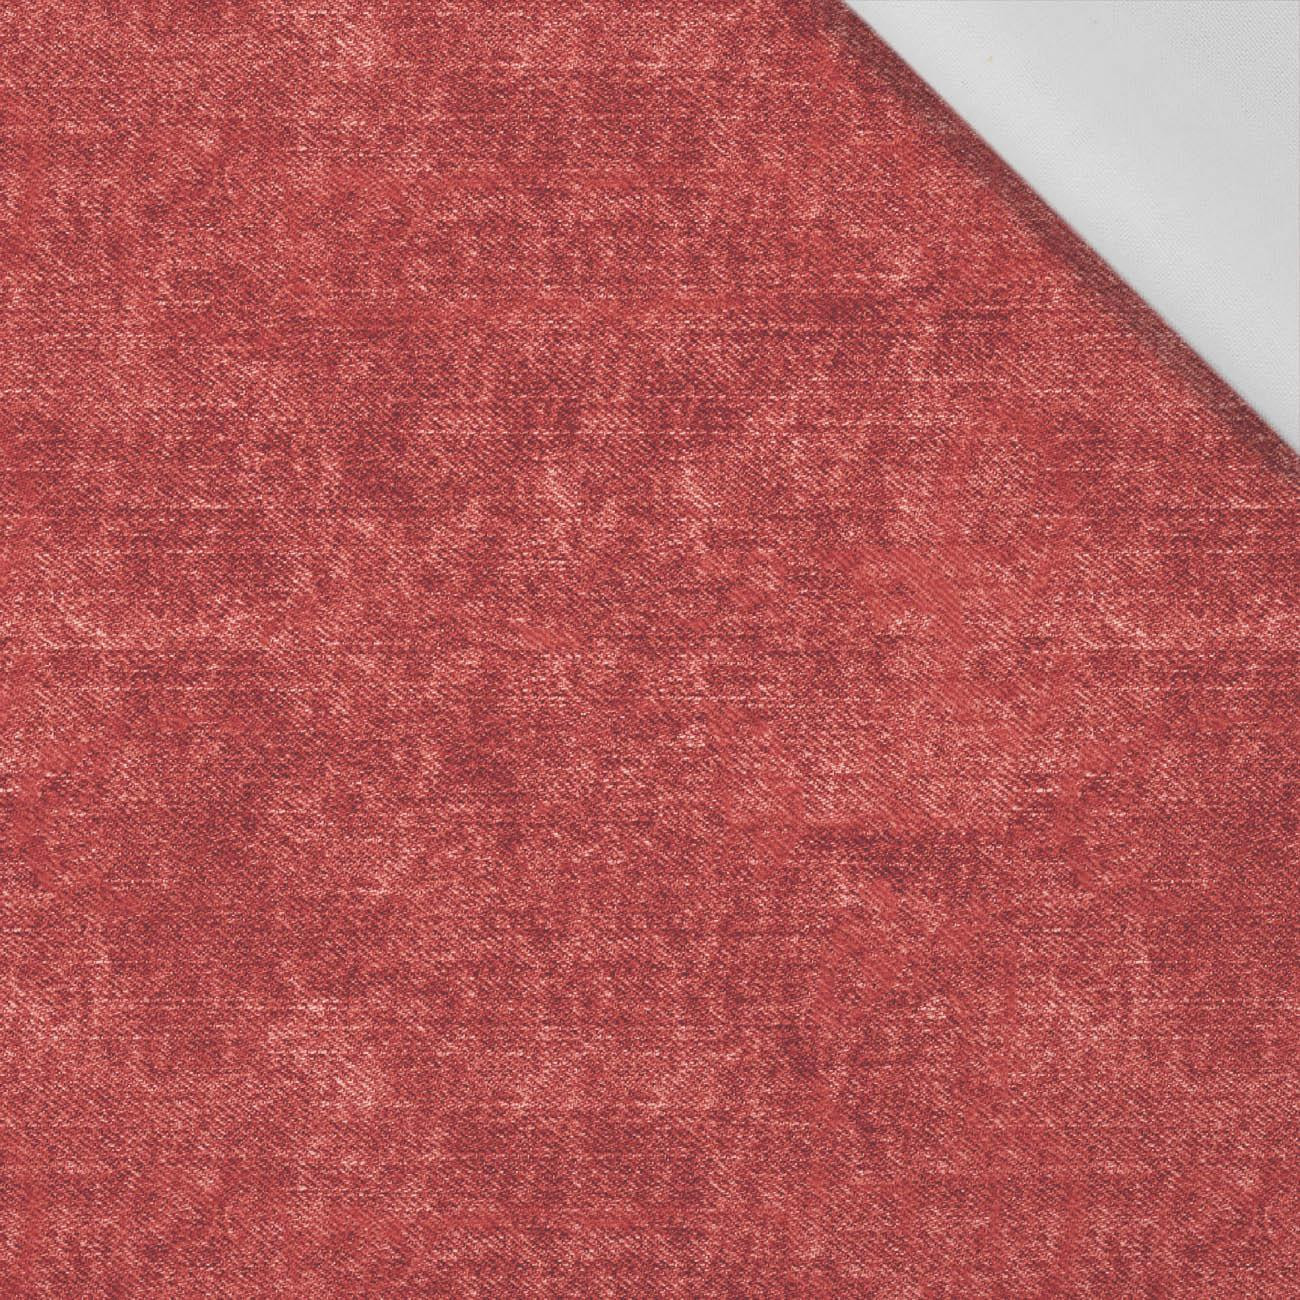 ACID WASH / RED - Cotton woven fabric